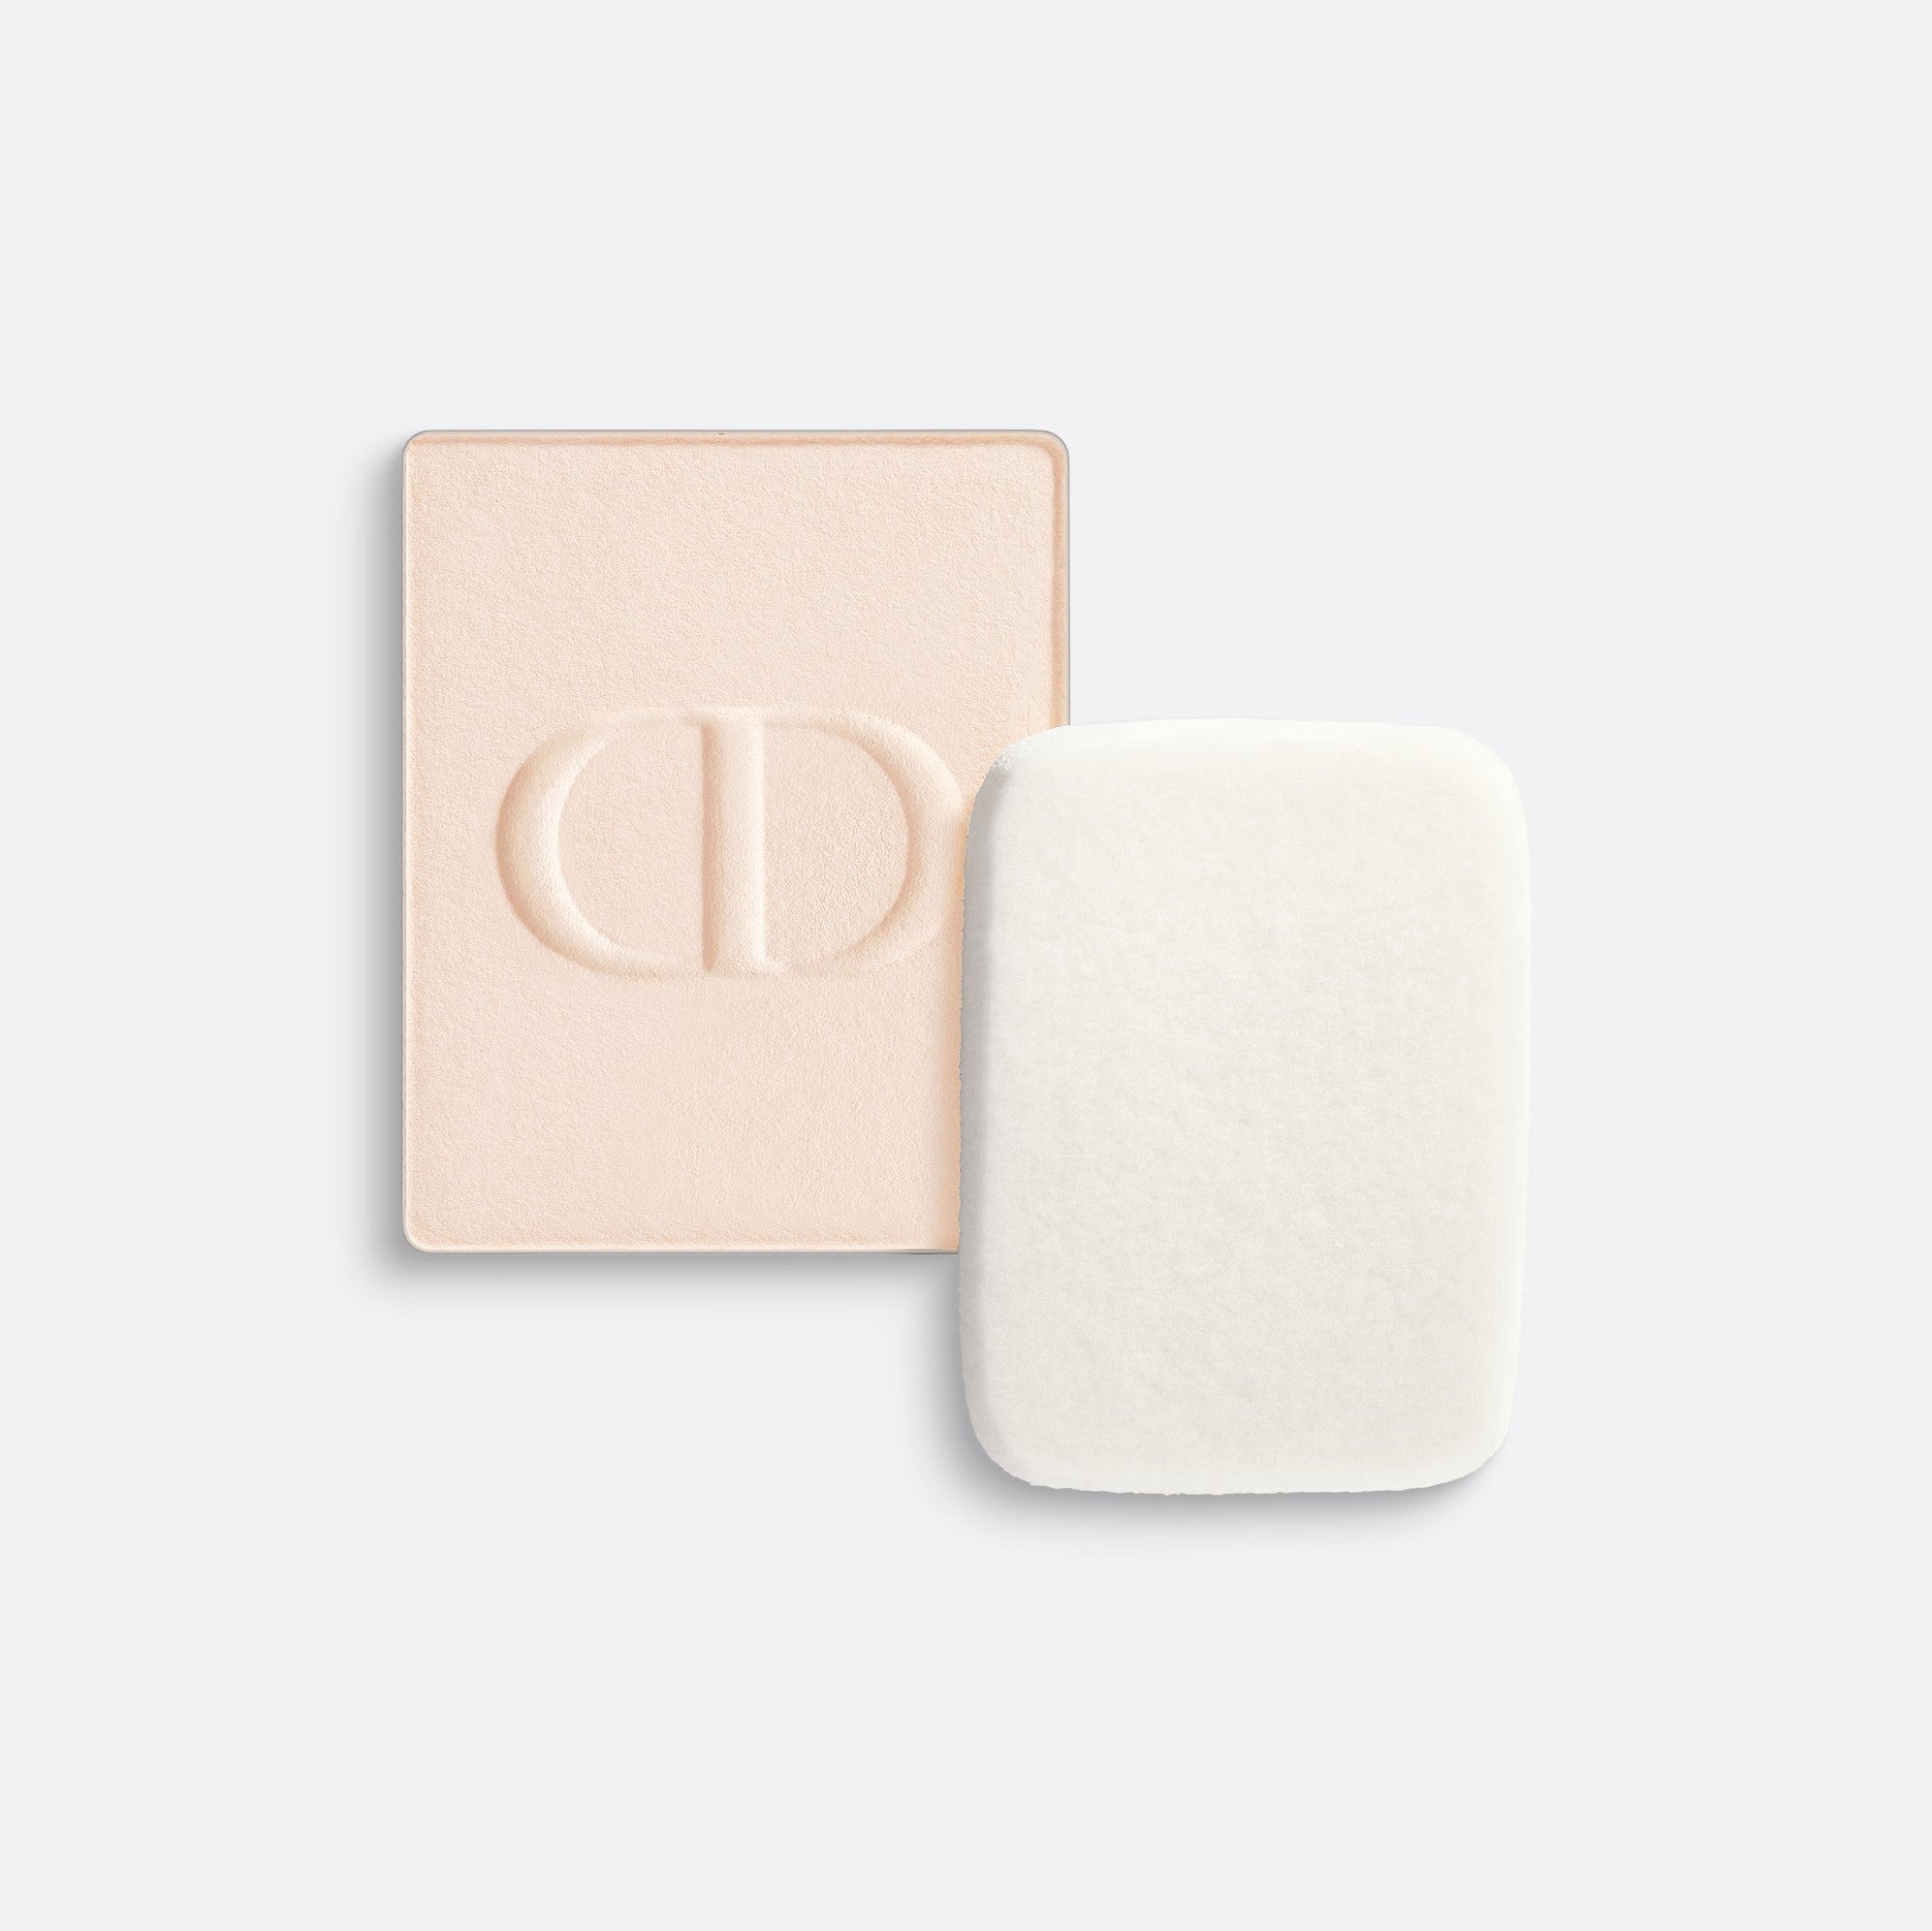 DIOR FOREVER NATURAL VELVET REFILL ~ No-Transfer Clean Compact Foundation Refill - 90% Natural-Origin Ingredients